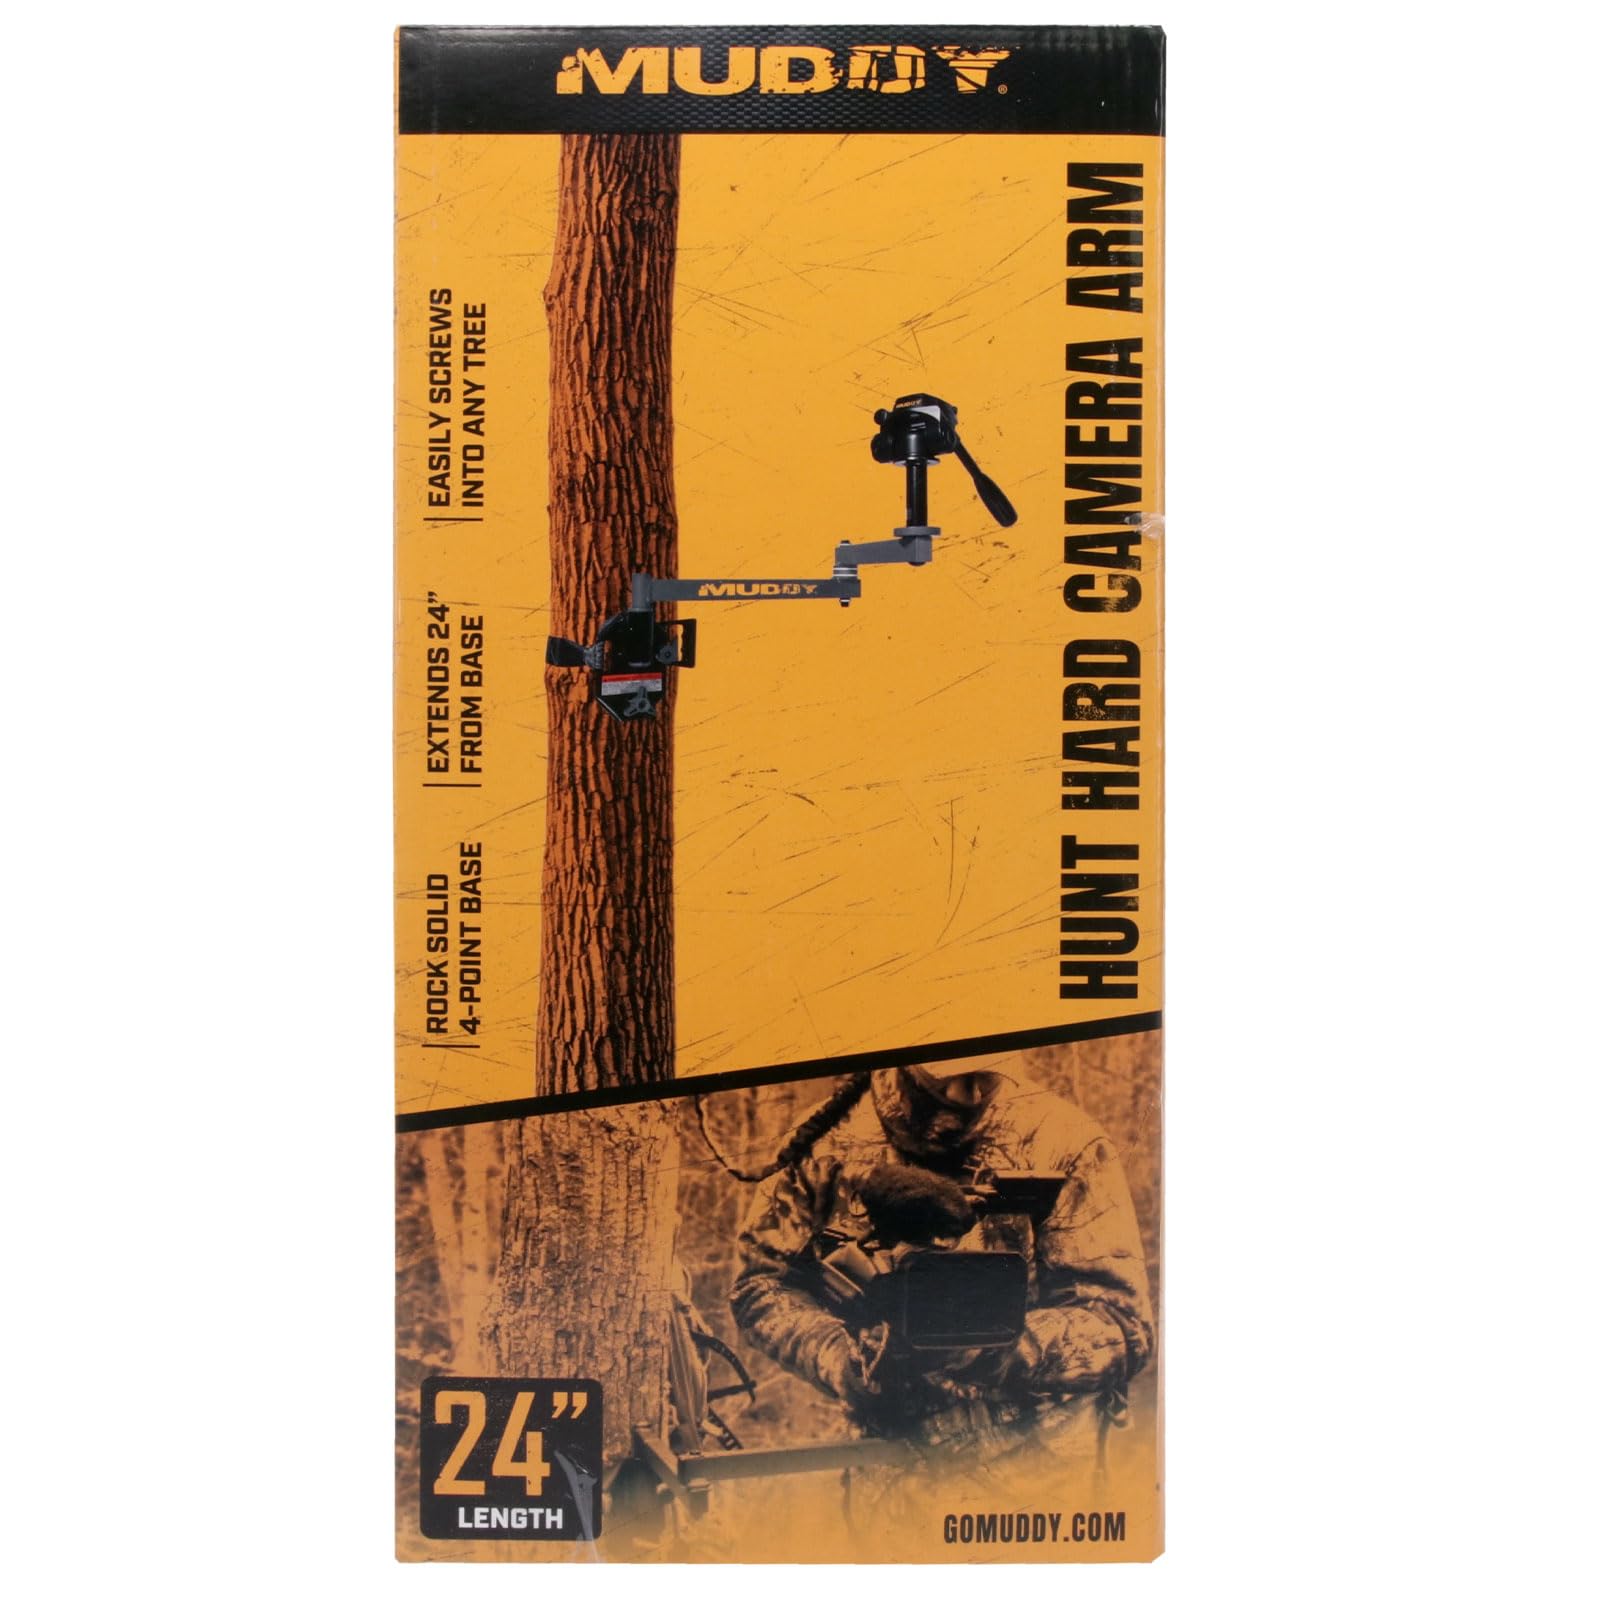 MUDDY Hunt Hard Compact Durable Aluminum Lightweight Ergonomic Portable Easy-to-Install Silent Outdoor Camera Arm | 24" Reach with Over 5 Points of Adjustment